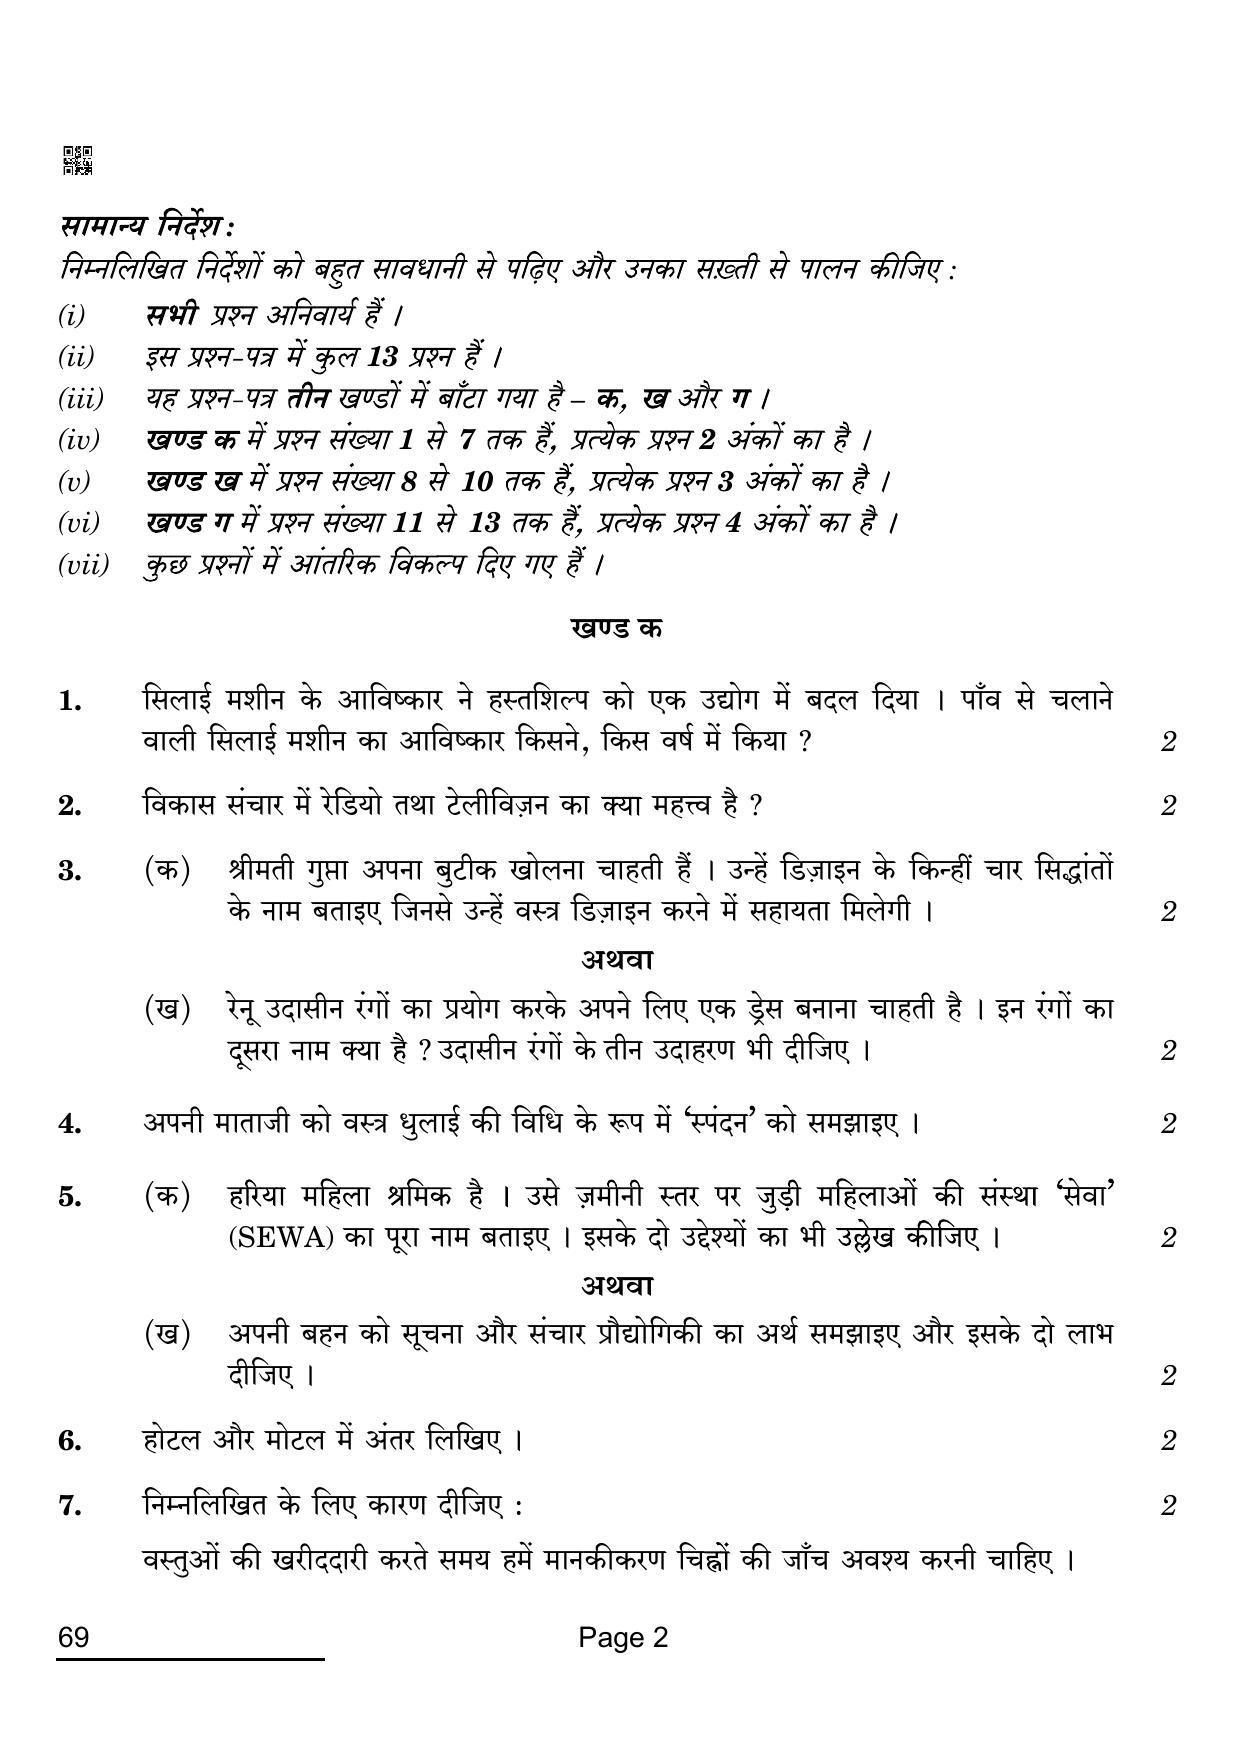 CBSE Class 12 69_Home Science 2022 Question Paper - Page 2